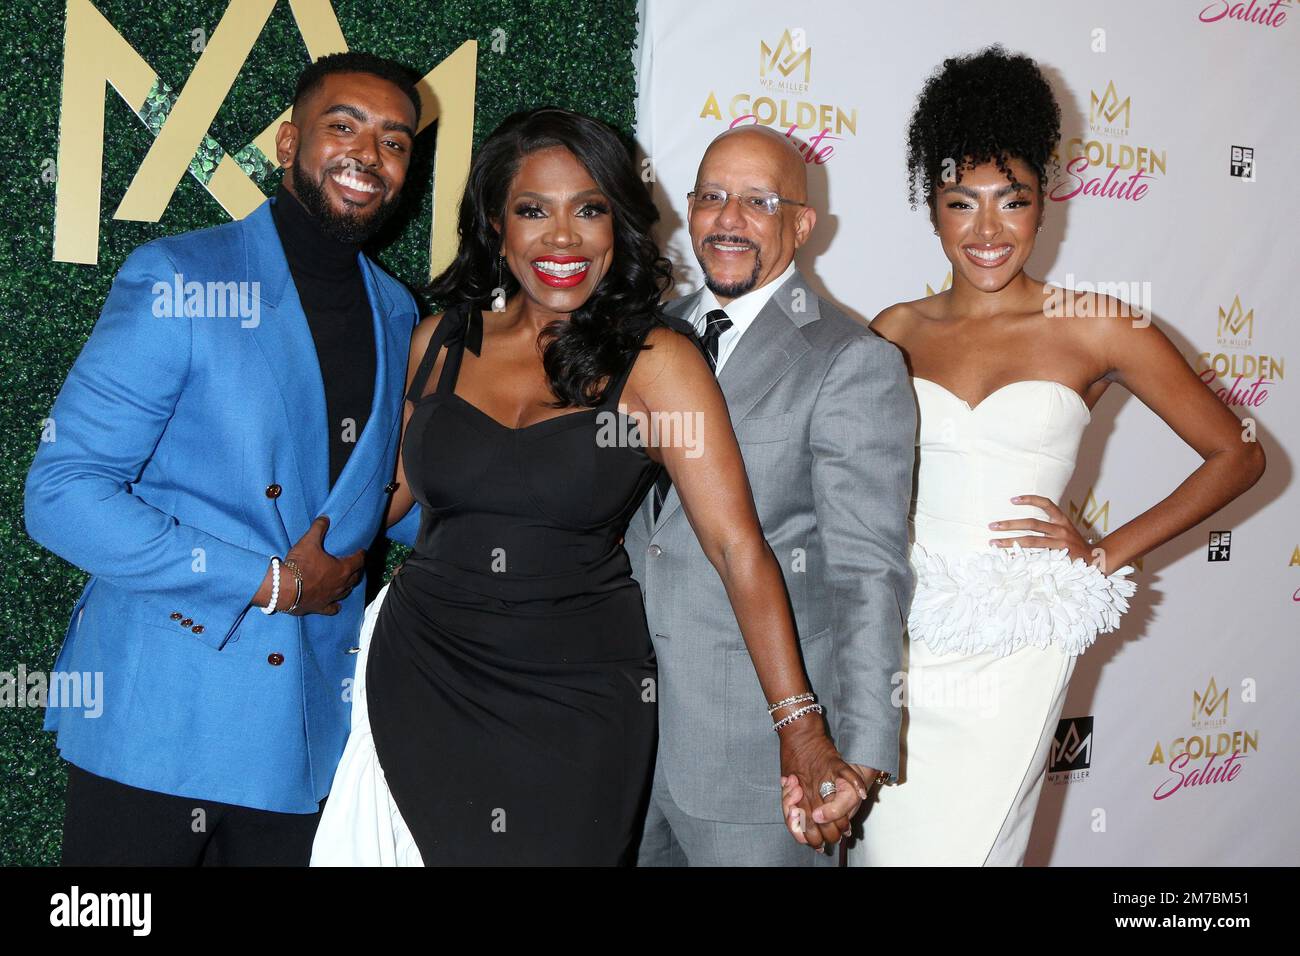 LOS ANGELES - JAN 8:  Etienne Maurice, Sheryl Lee Ralph, Vincent Hughes, Ivy-Victoria Maurice at A Golden Salute to Sheryl Lee Ralph and Niecy Nash-Betts at the Ritz Carlton Hotel on January 8, 2023 in Marina Del Rey, CA Stock Photo